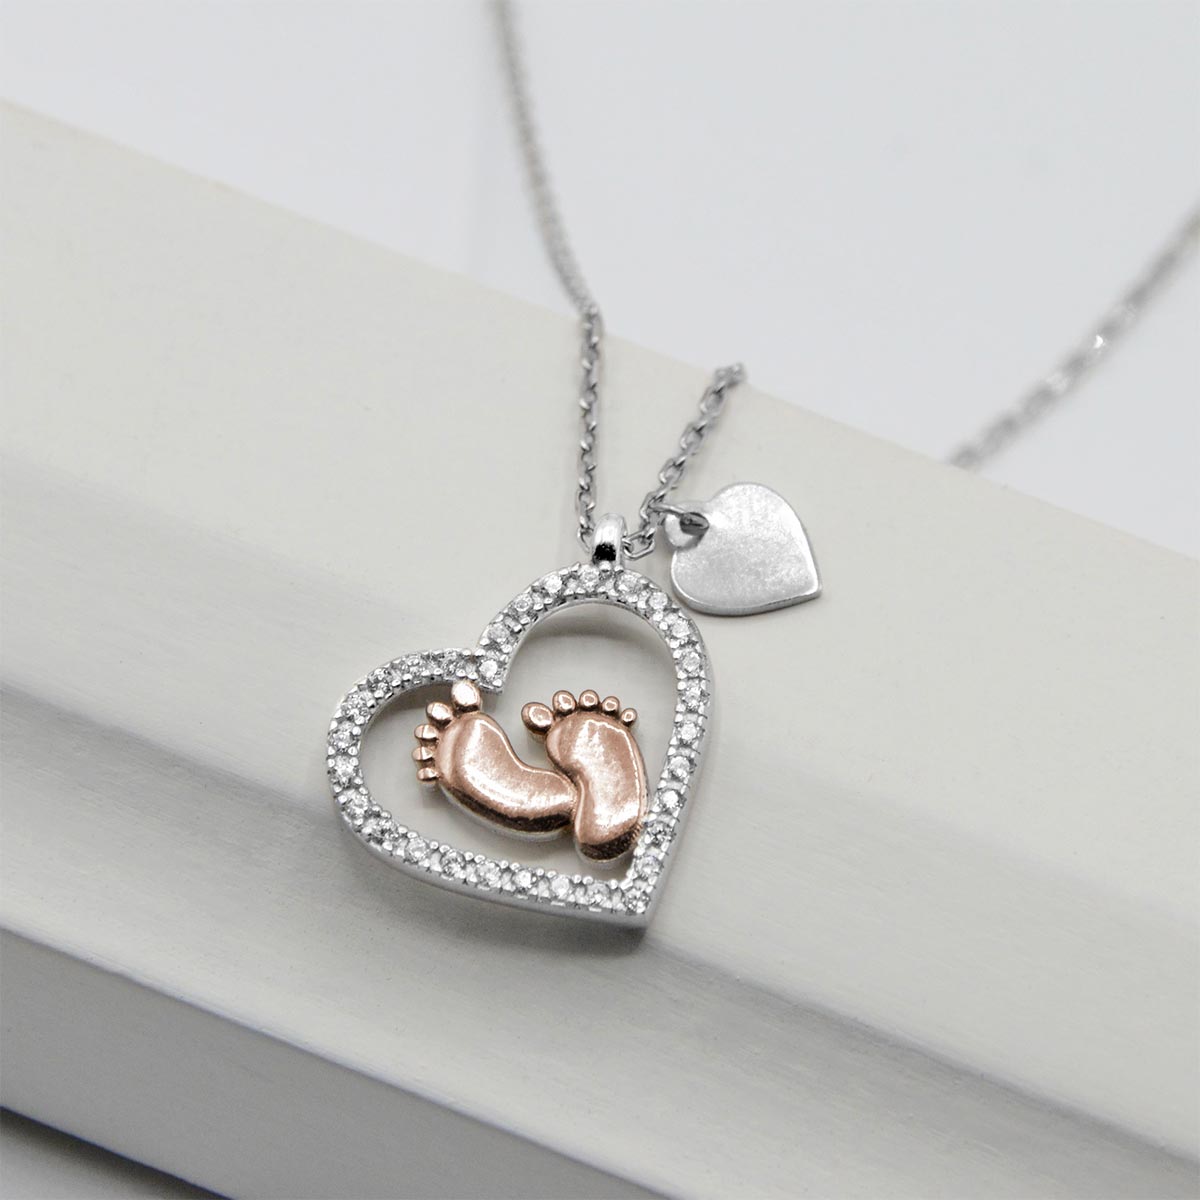 Dear Mummy, This Mother's Day - Baby Feet Heart Pendant Necklace Gift Set